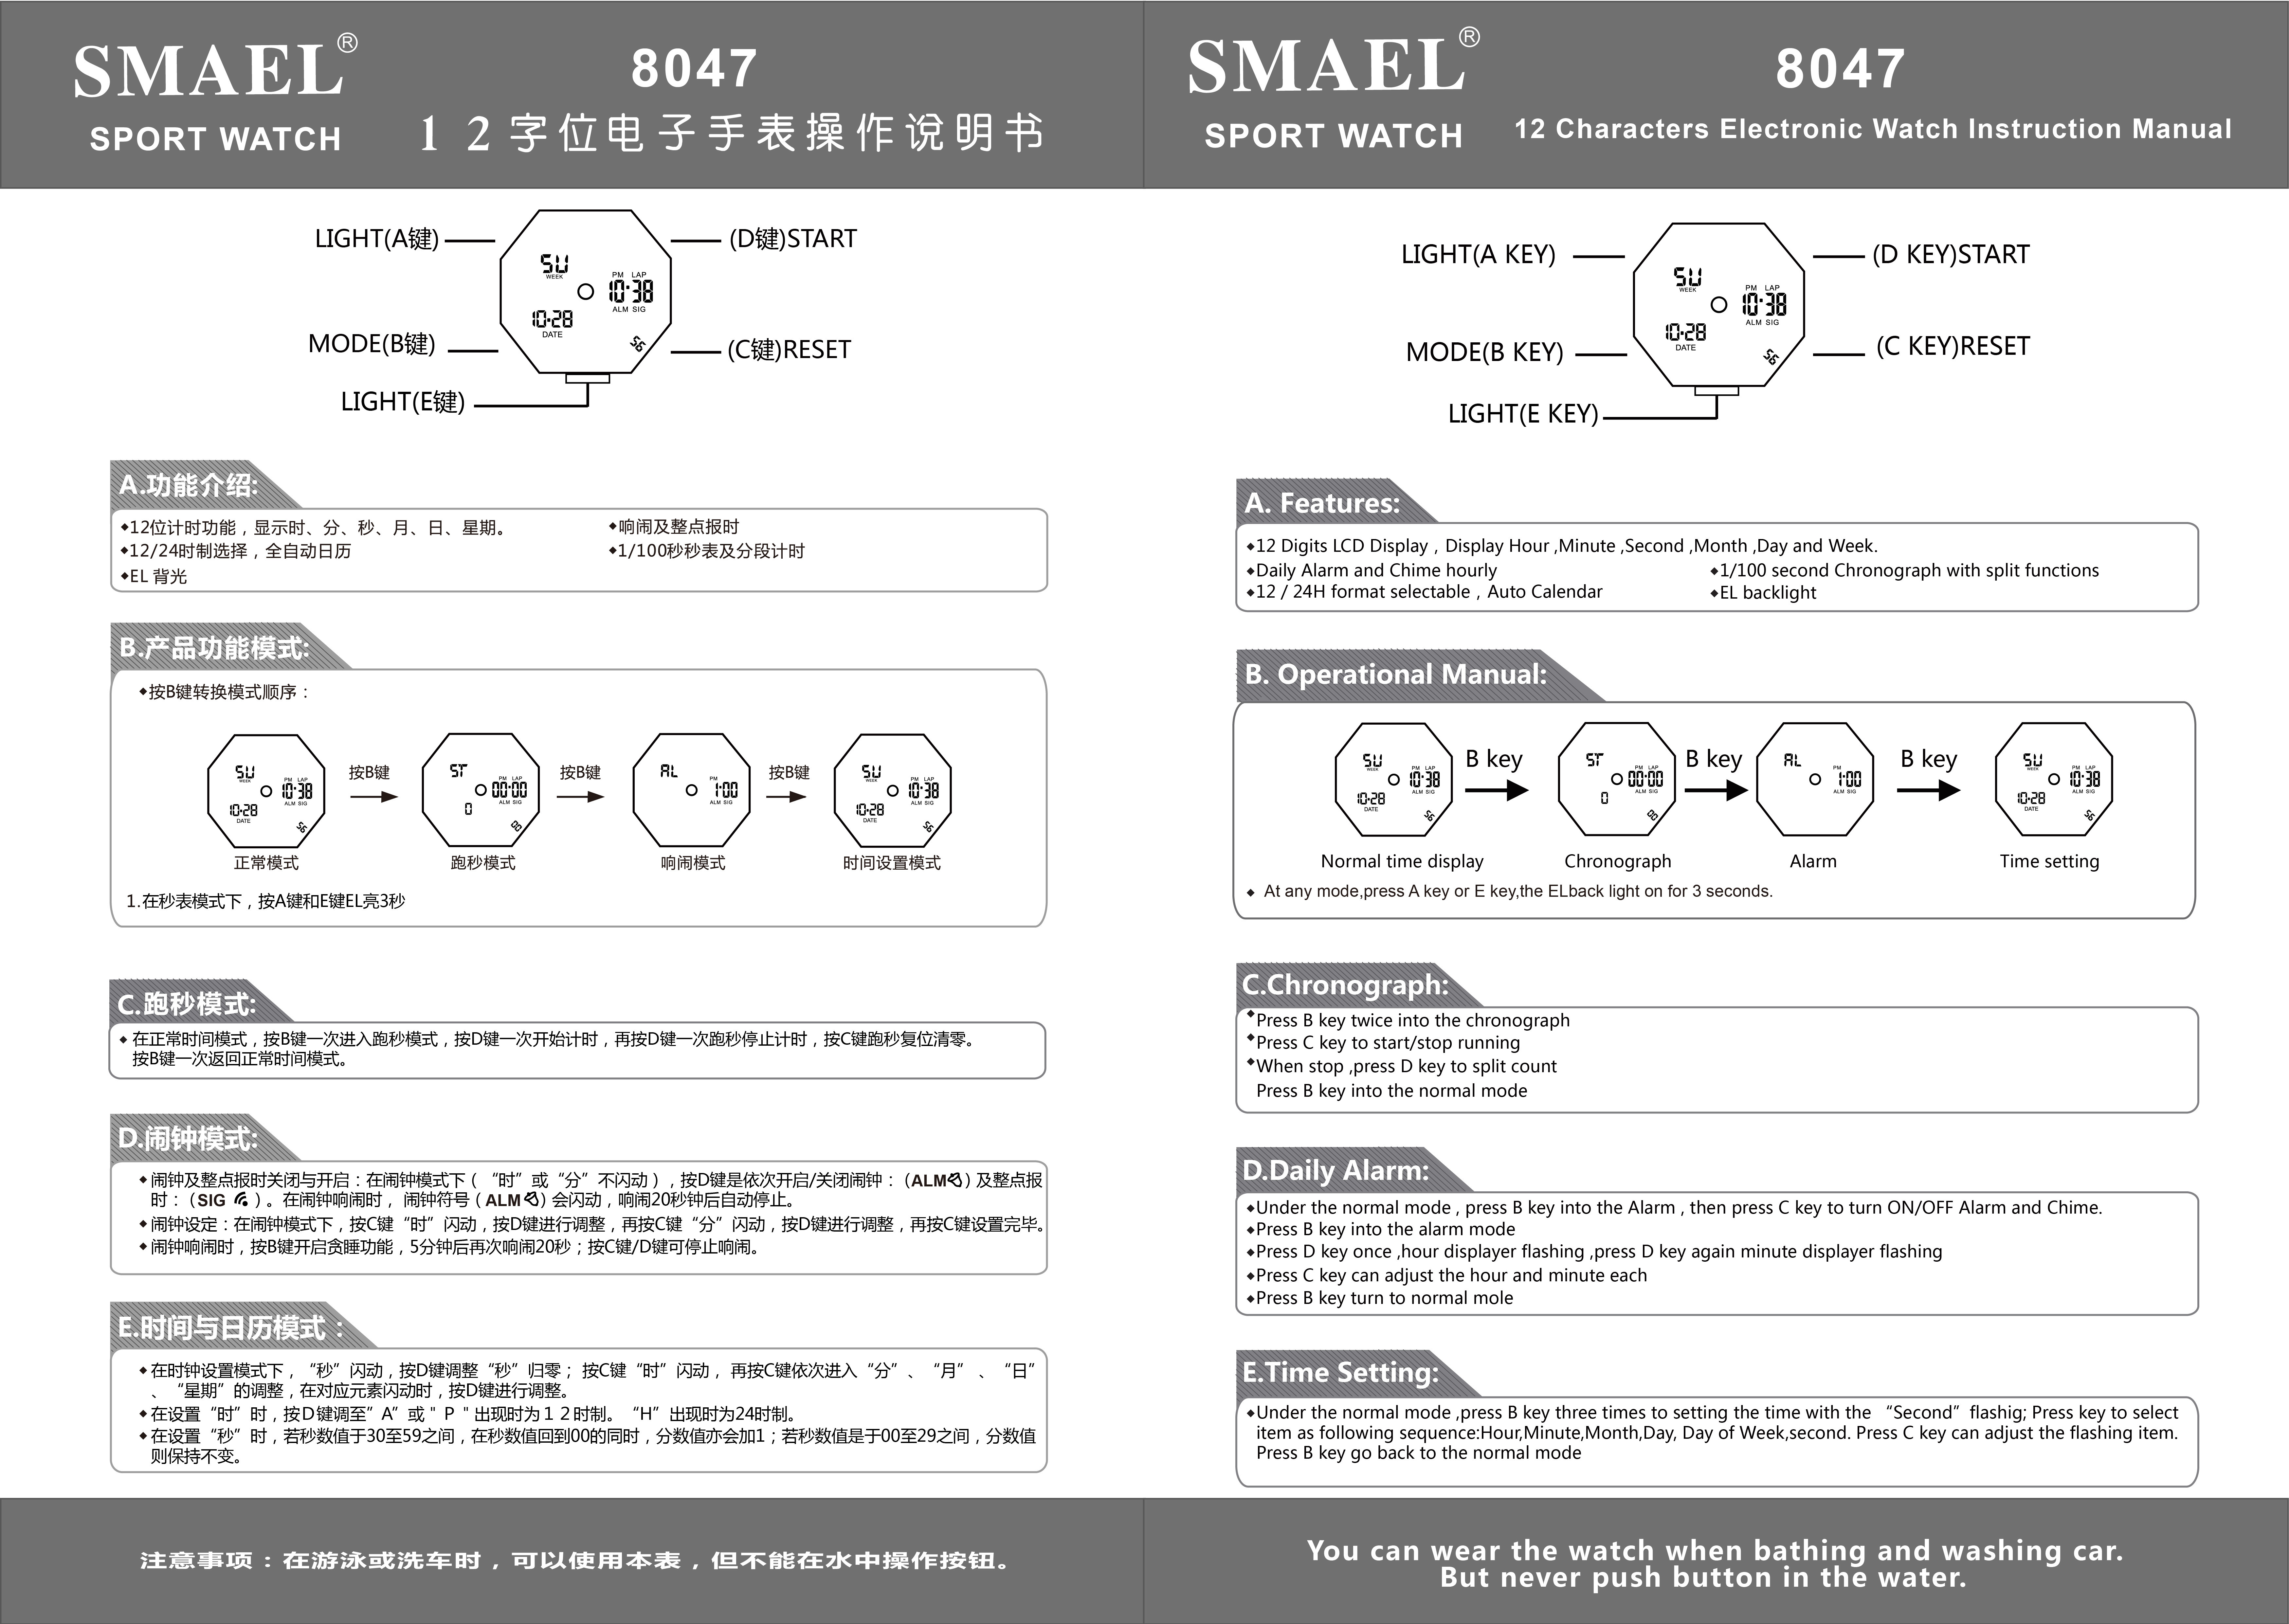 8047 instructions in English and Chinese 12